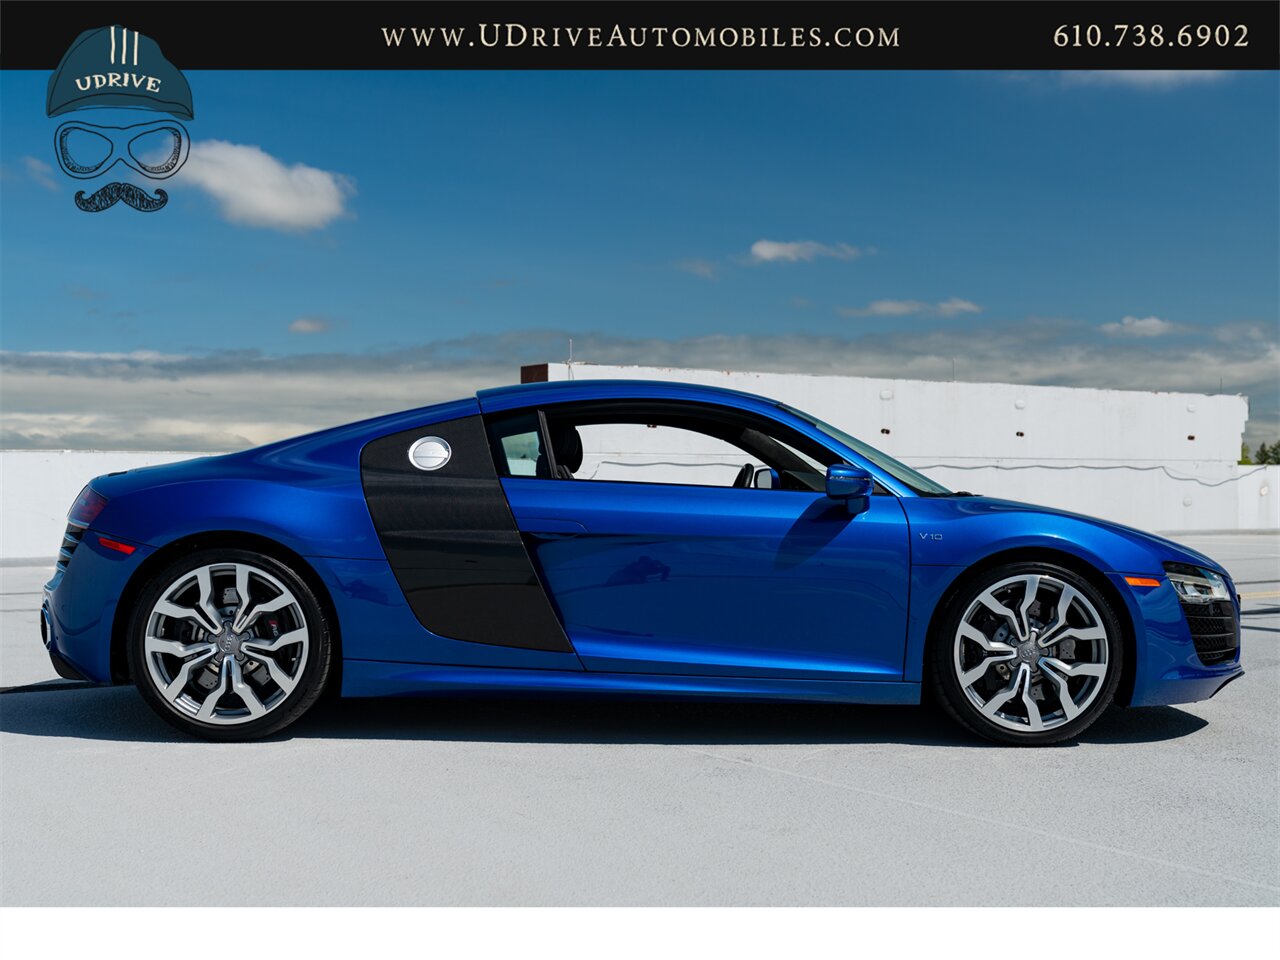 2015 Audi R8 5.2 V10 Quattro 6 Speed Manual 10k Miles  Diamond Stitched Leather 1 of 2 - Photo 16 - West Chester, PA 19382